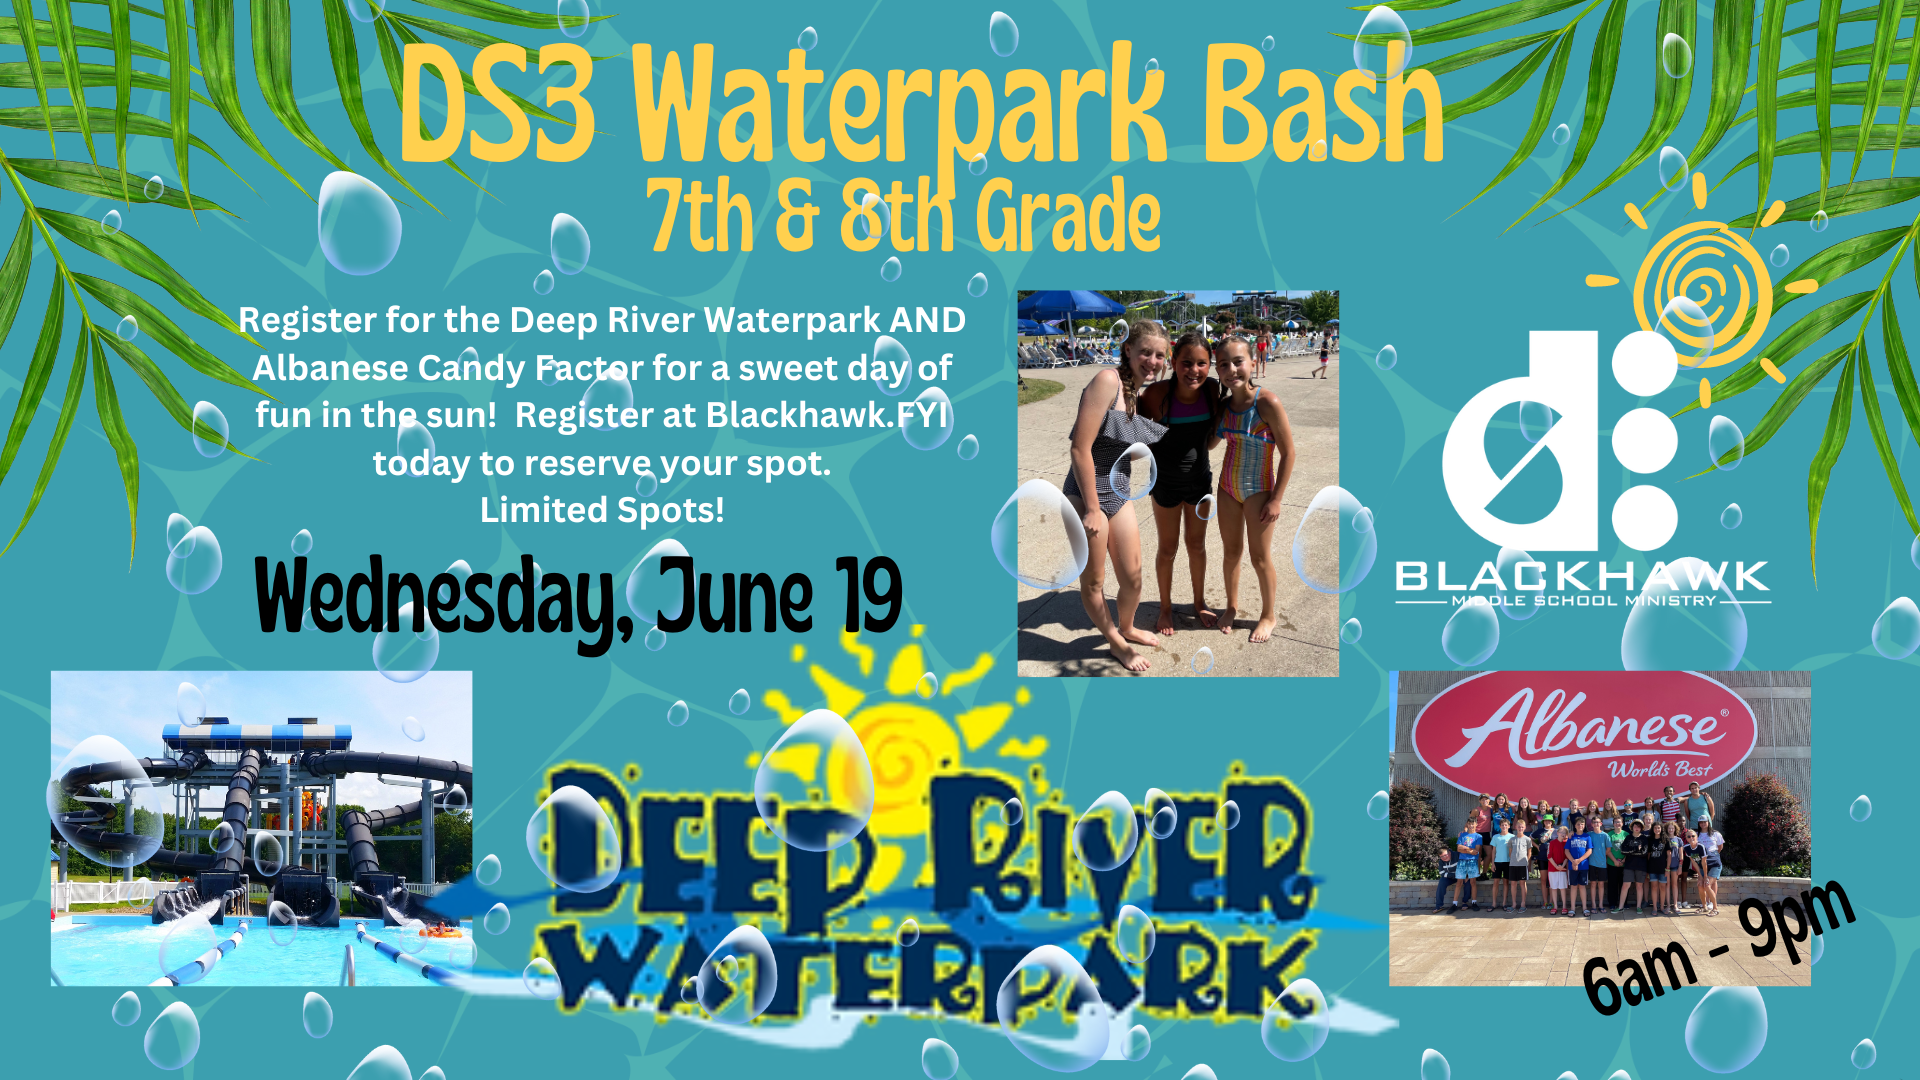 DS3 7th & 8th Grade Sweet Splash Adventure: Deep River Waterpark & Albanese Candy Factory Day